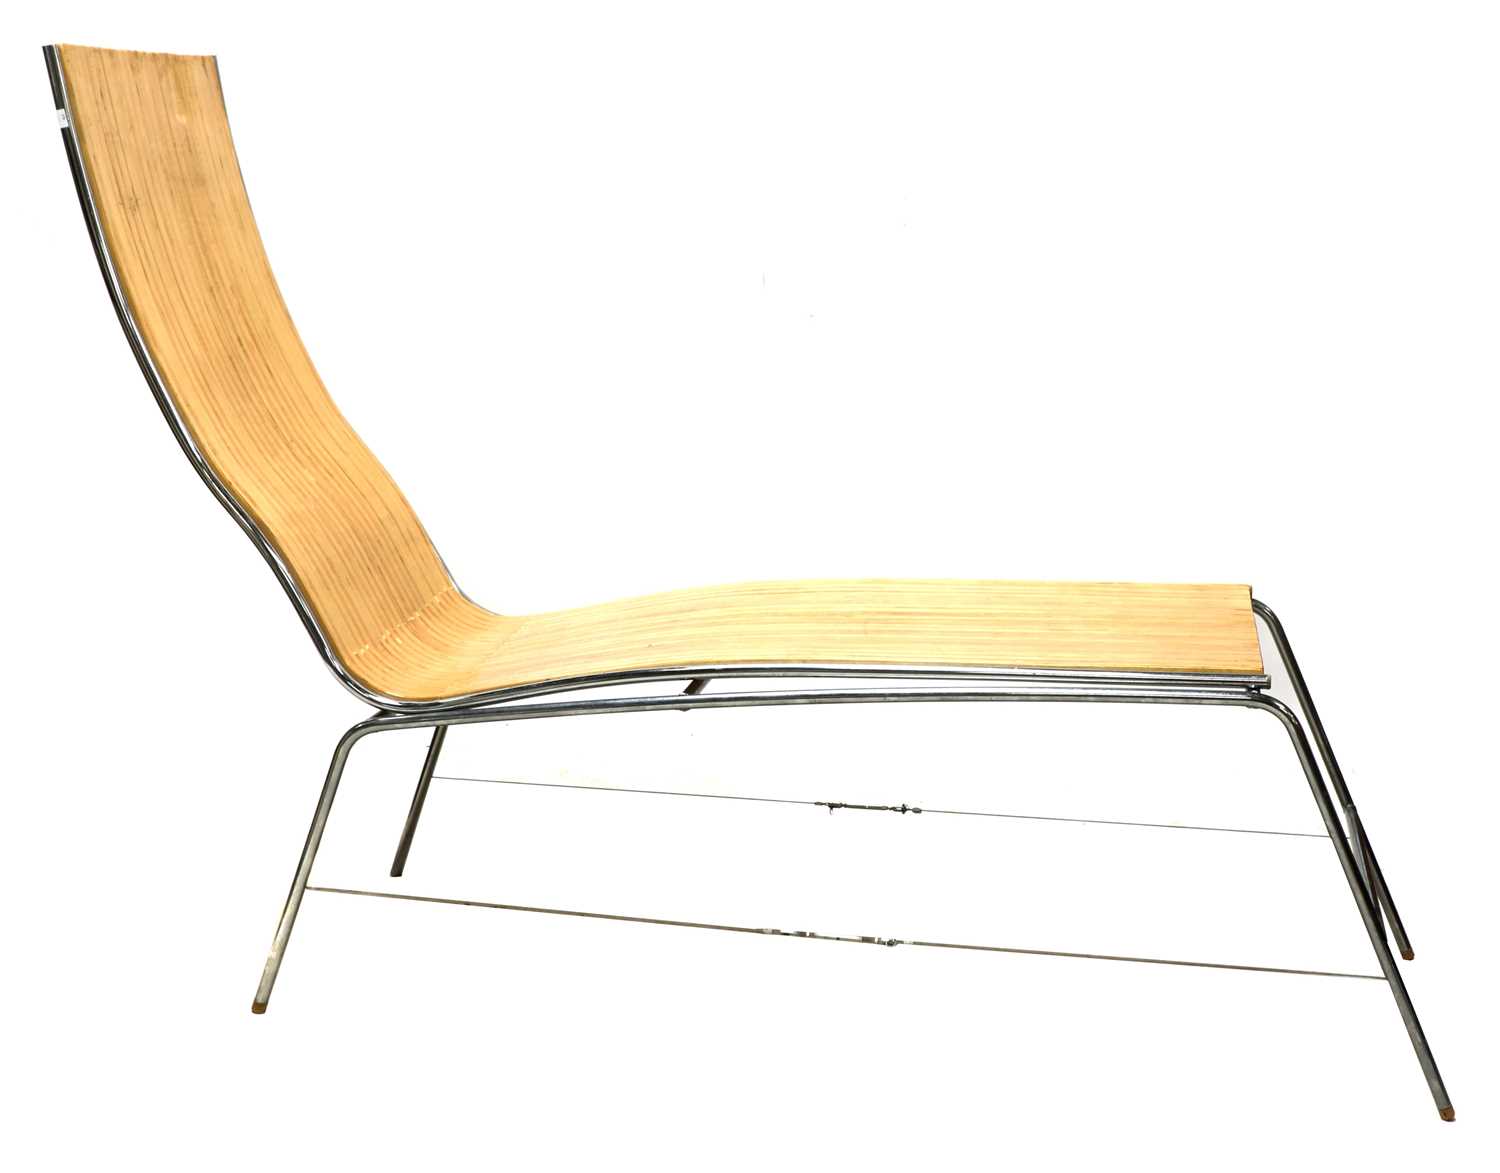 A laminated wood chaise lounge, - Image 2 of 4